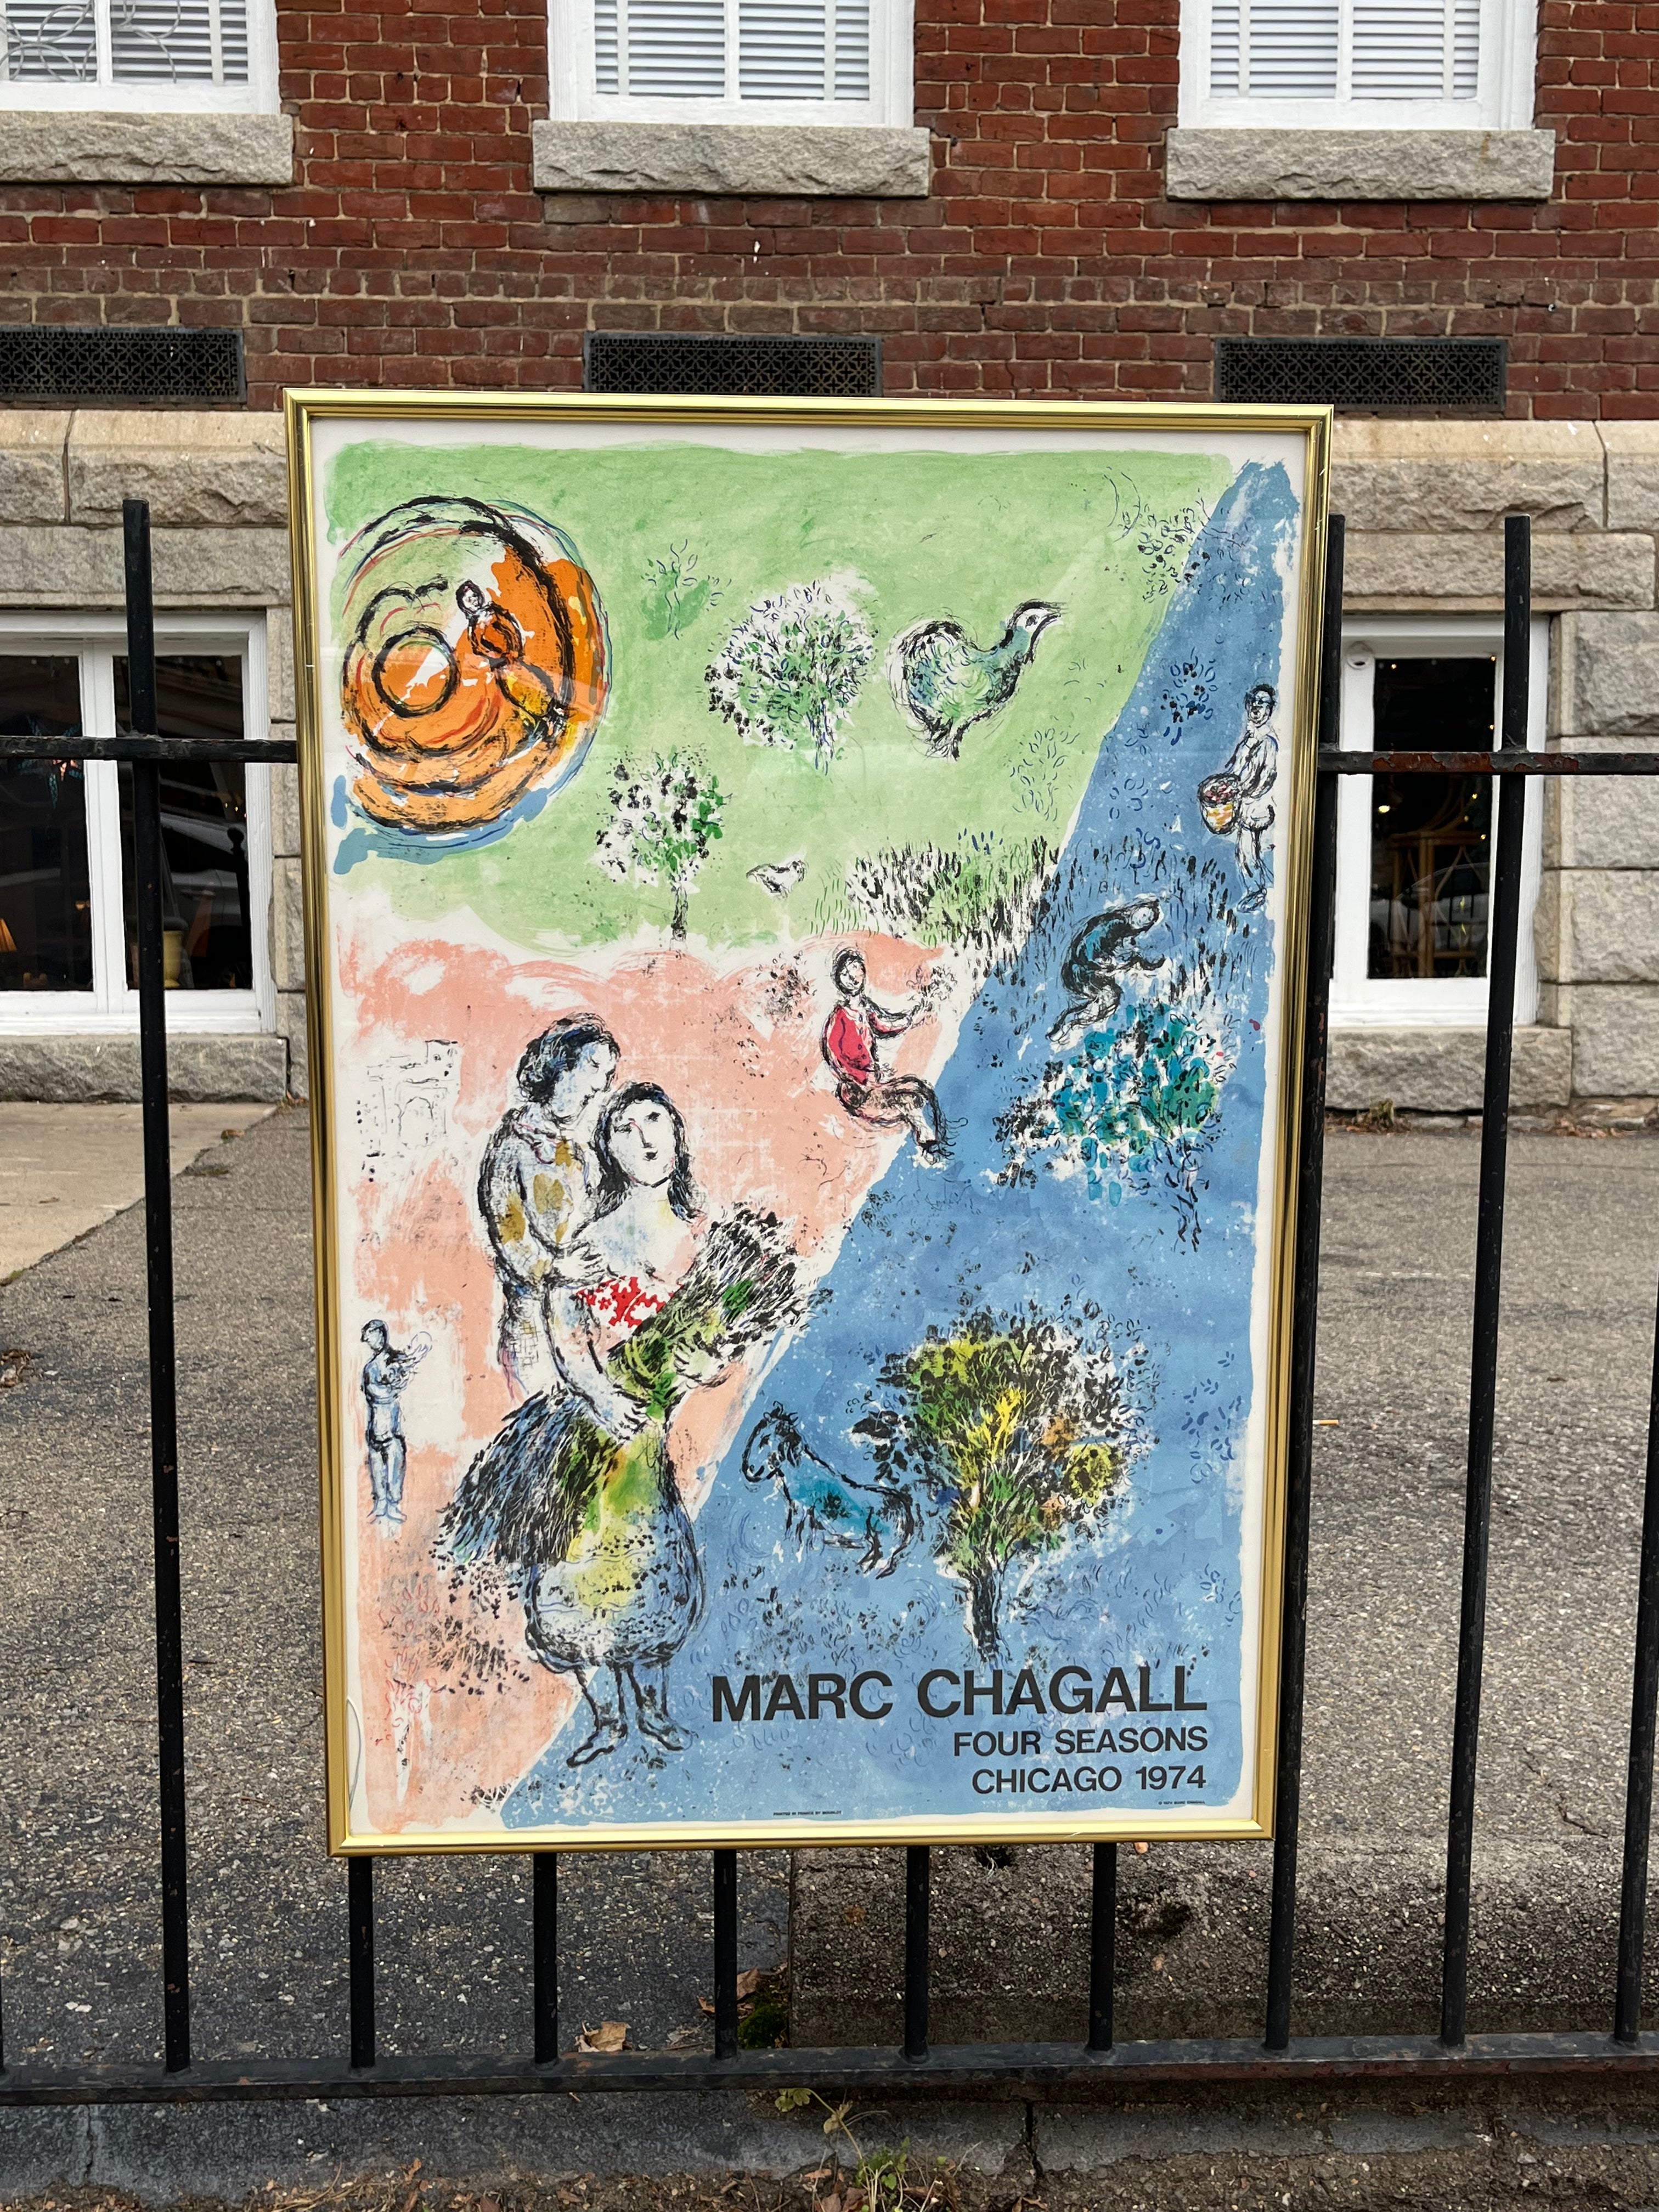 Chagall “Four Seasons” Poster